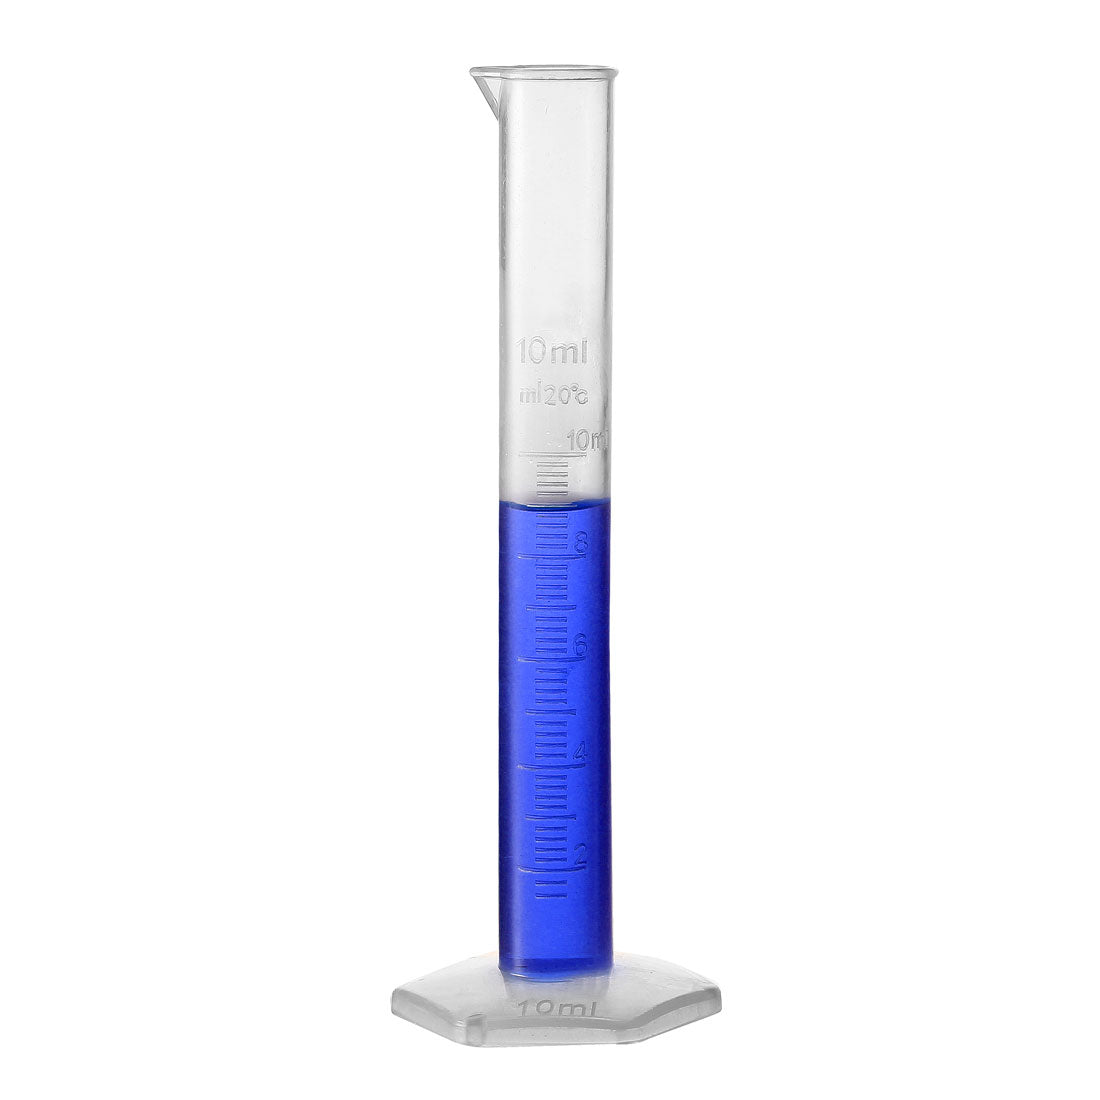 uxcell Uxcell 10ml Laboratory Measurements Clear White Plastic Hex Base Graduated Cylinder for Chemical Measuring 3 Pcs